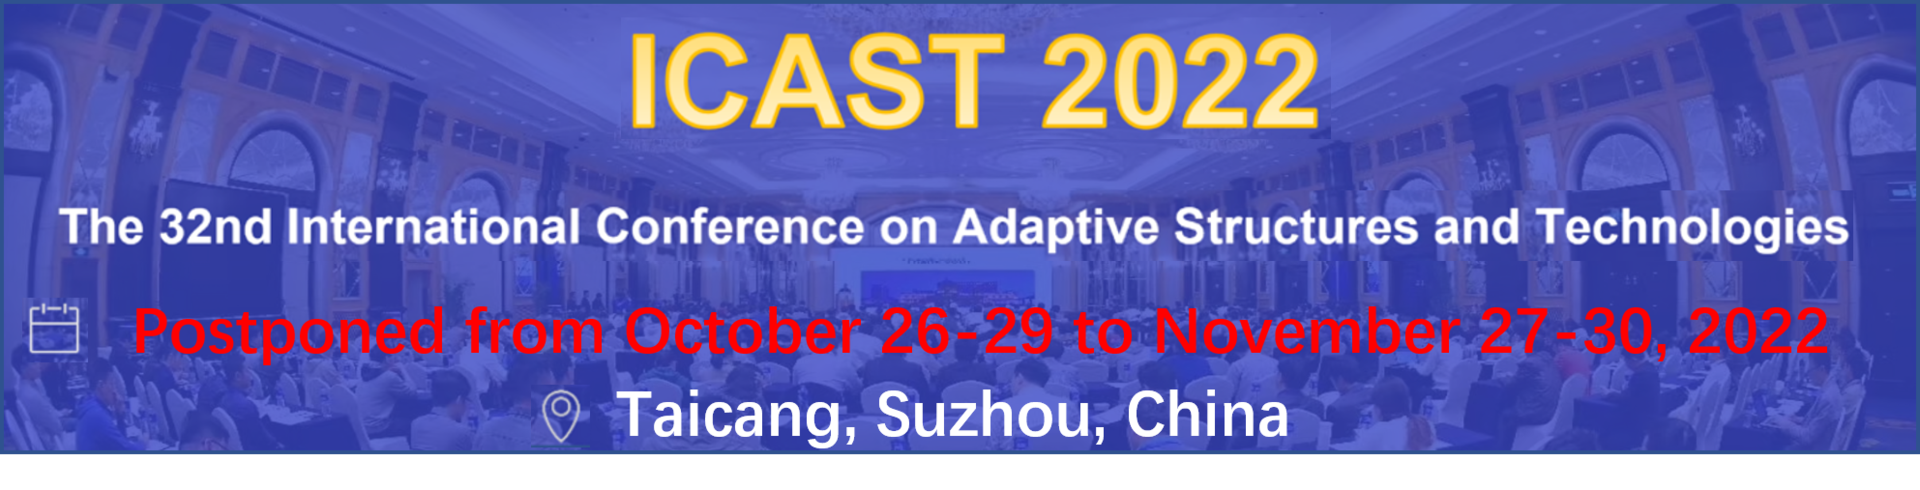 The 32nd International Conference on Adaptive Structures and Technologies